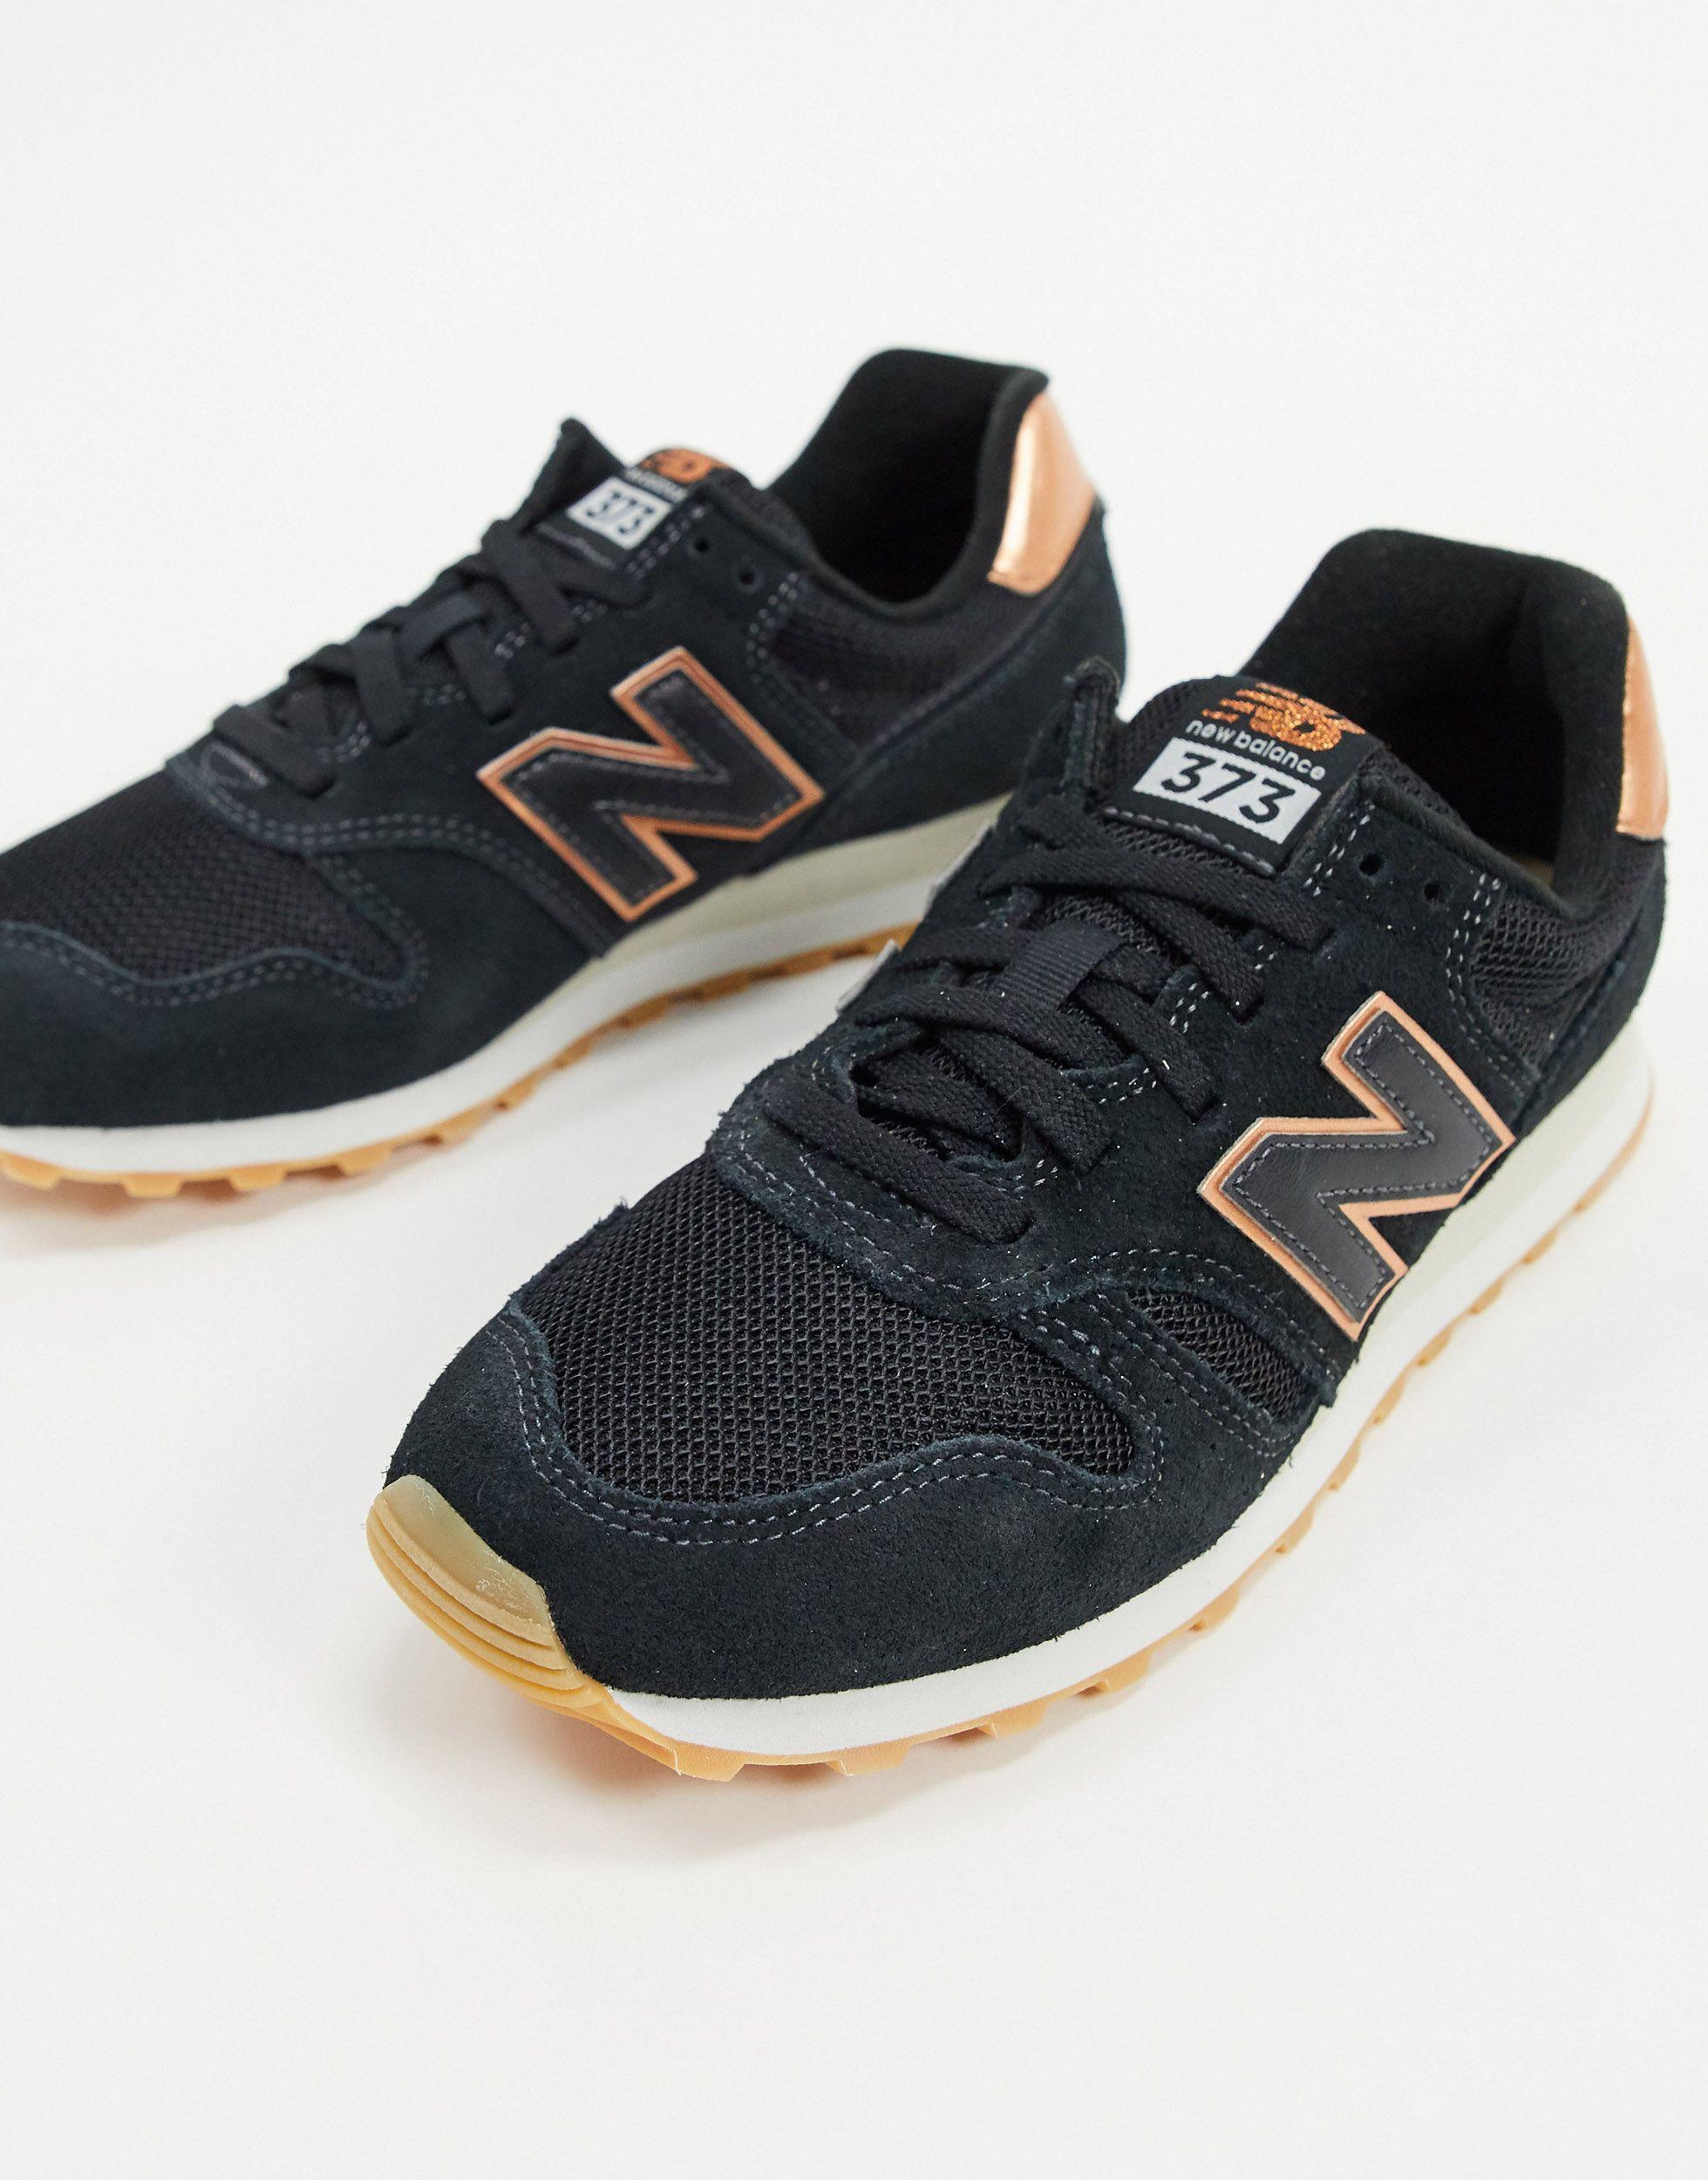 New Balance Suede 373 Womens Black / Rose Gold Trainers - Lyst